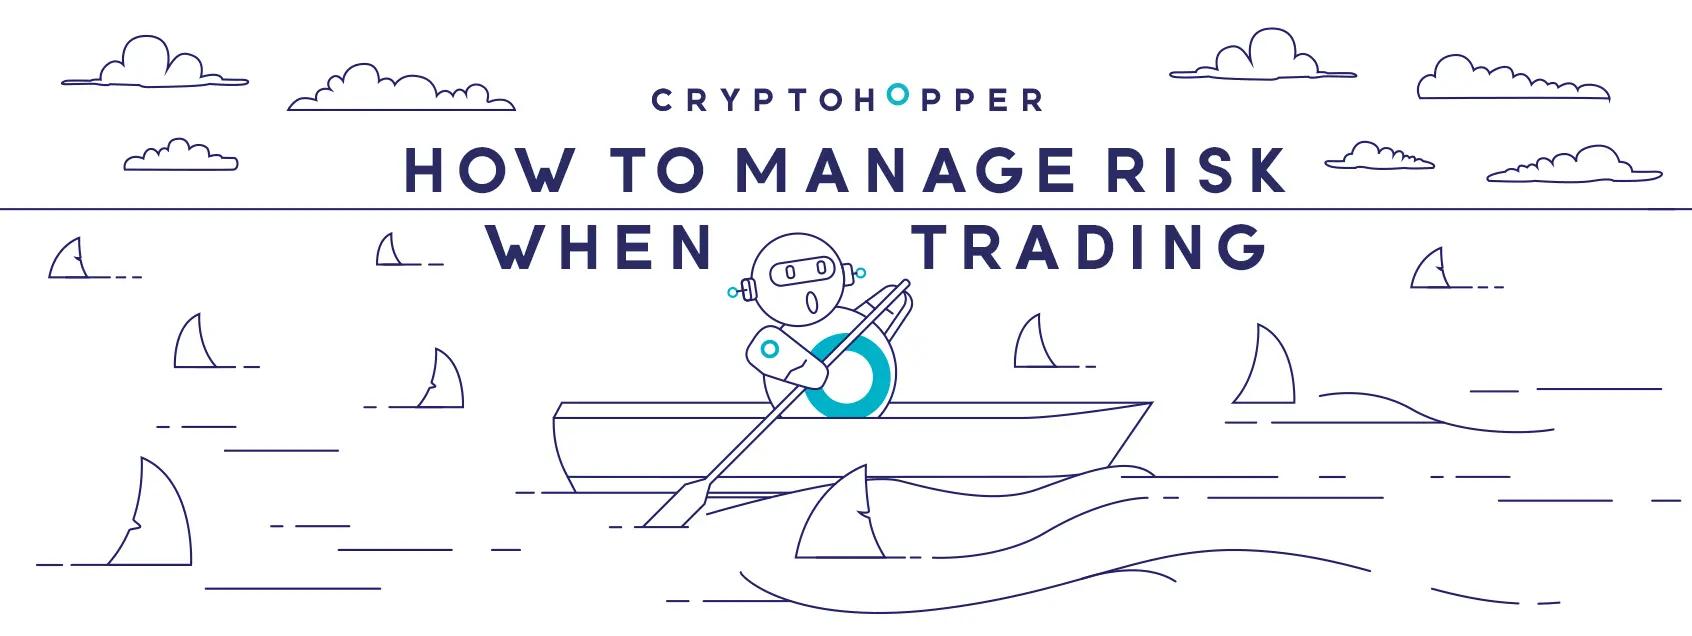 How to Manage Risk When Trading Crypto in 2019